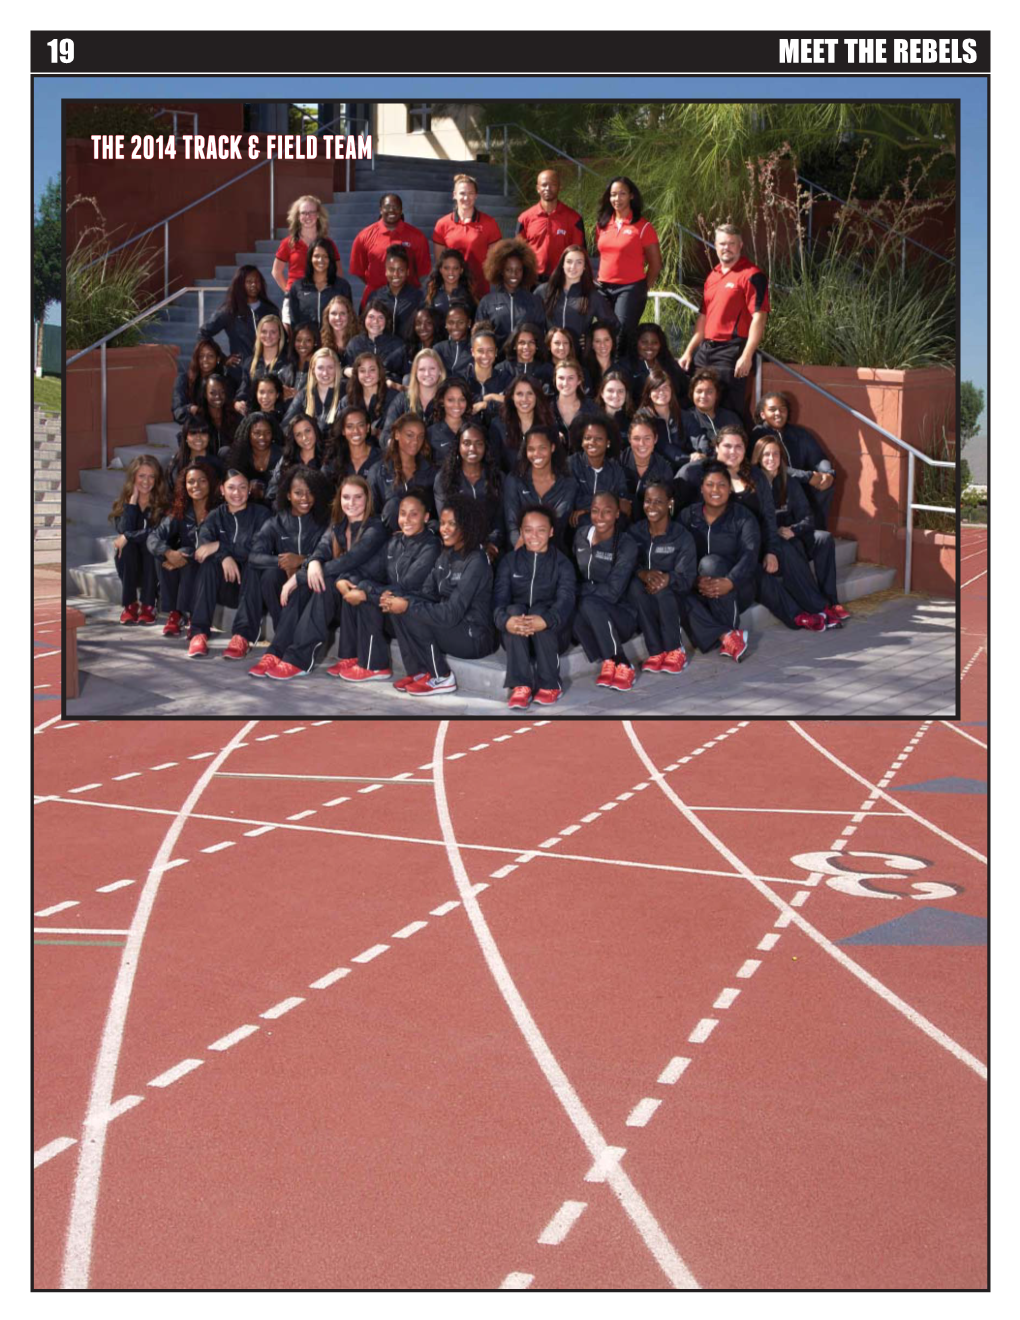 2014 T&F MG Section 2.Indd